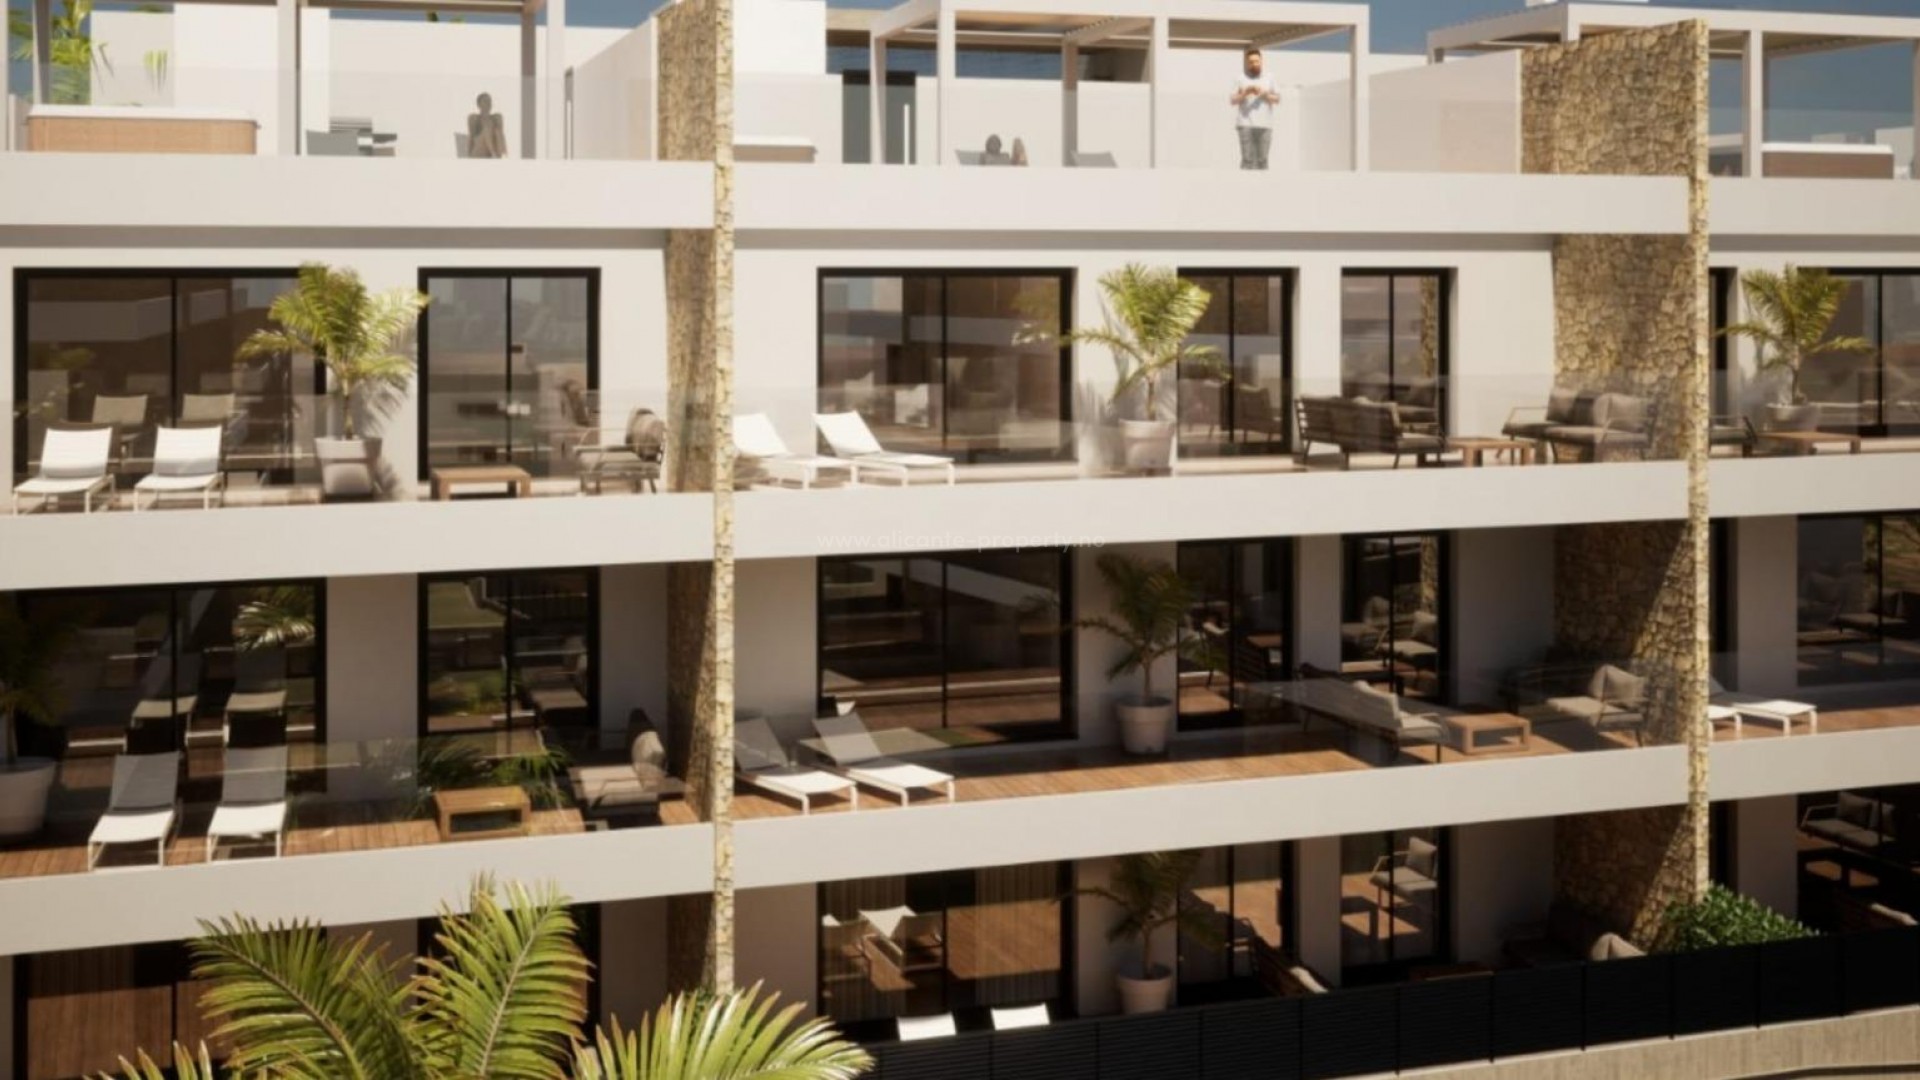 New built residential complex with sea view in Finestrat near Benidorm, several types of flats, some with sea view, swimming pool and gym with jacuzzi